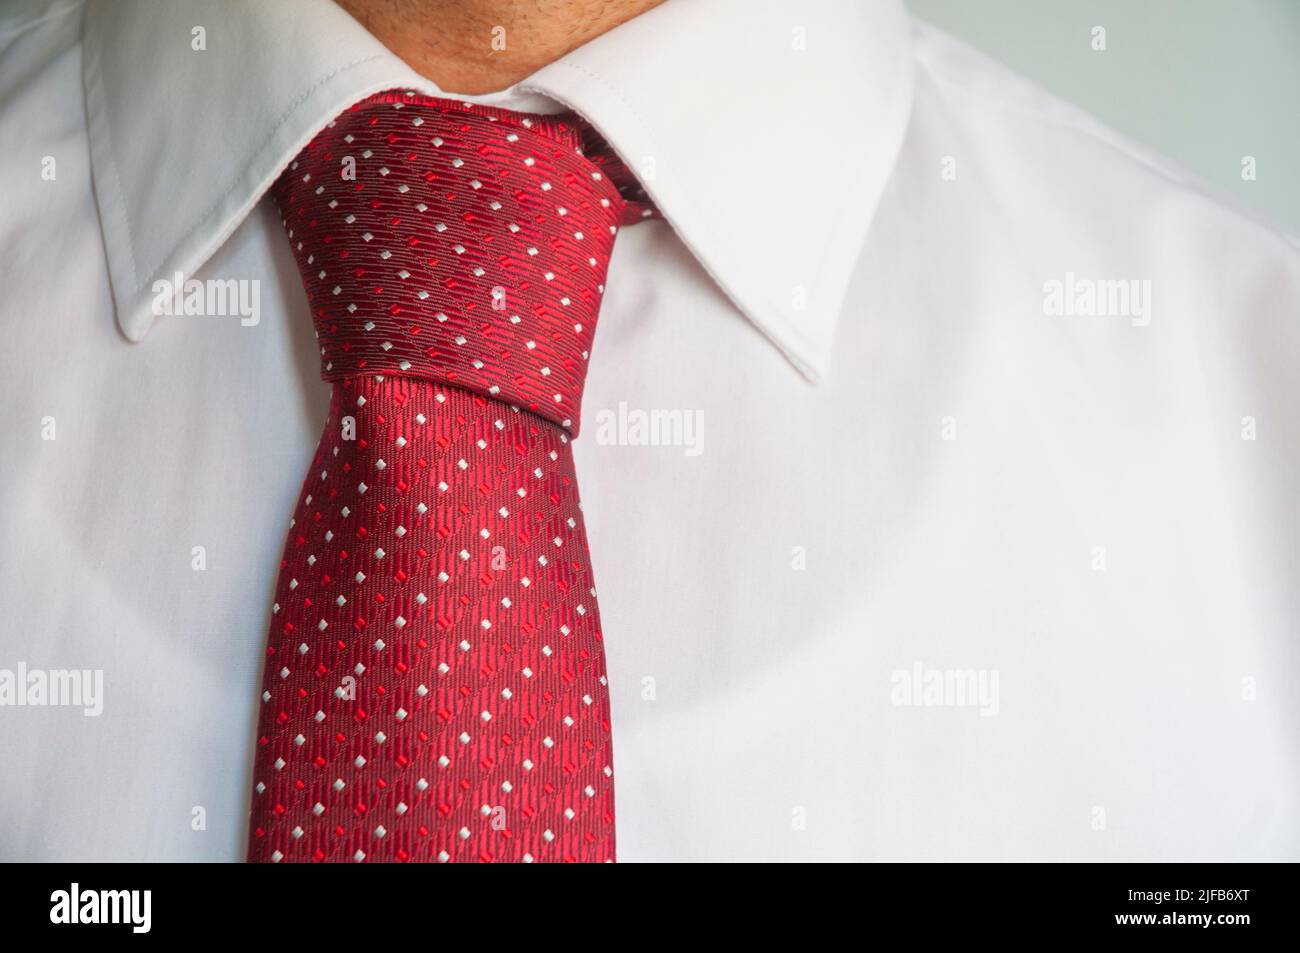 Executive wearing white shirt and red tie. Close view. Stock Photo